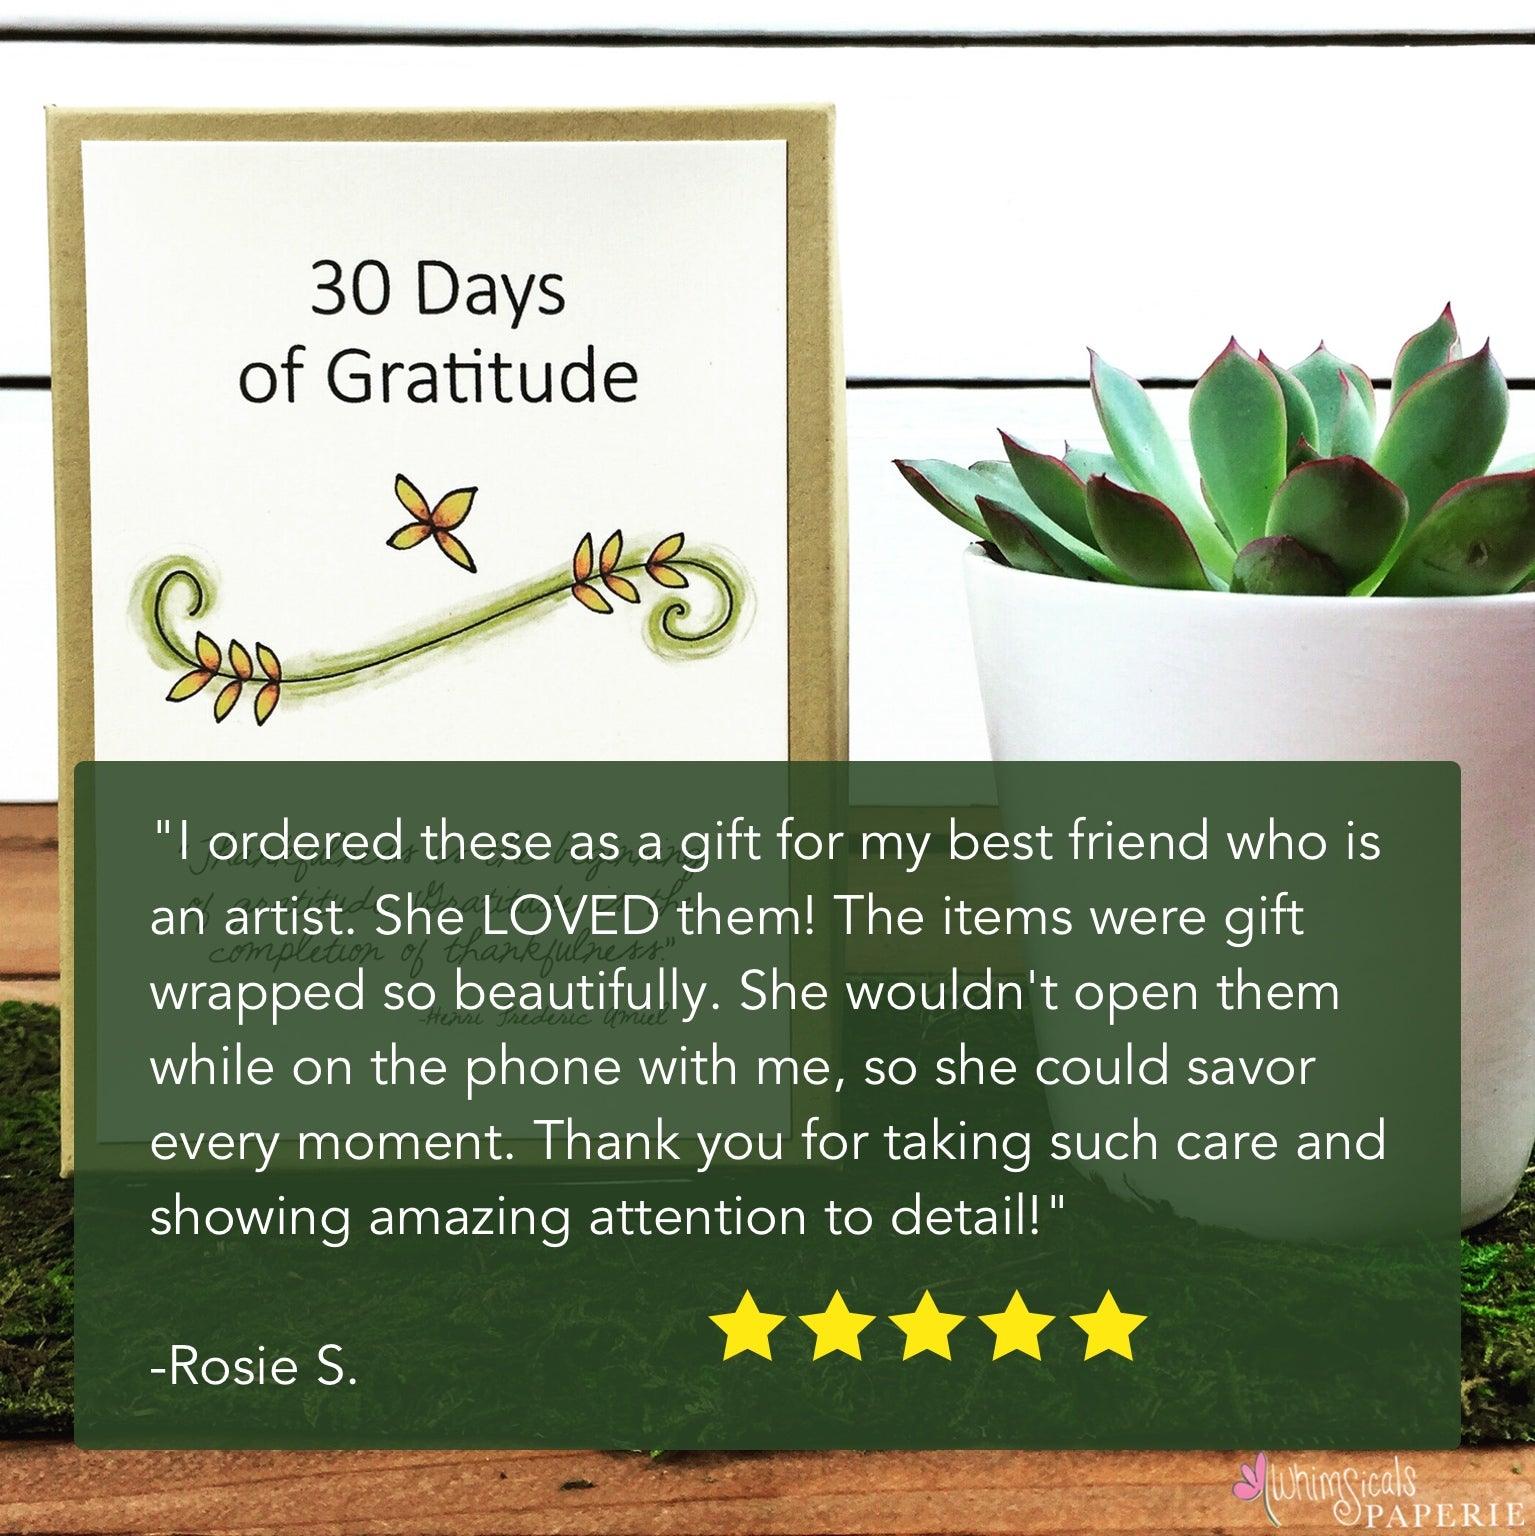 30 Days of Gratitude Boxed Card Deck with Stand - Whimsicals Paperie